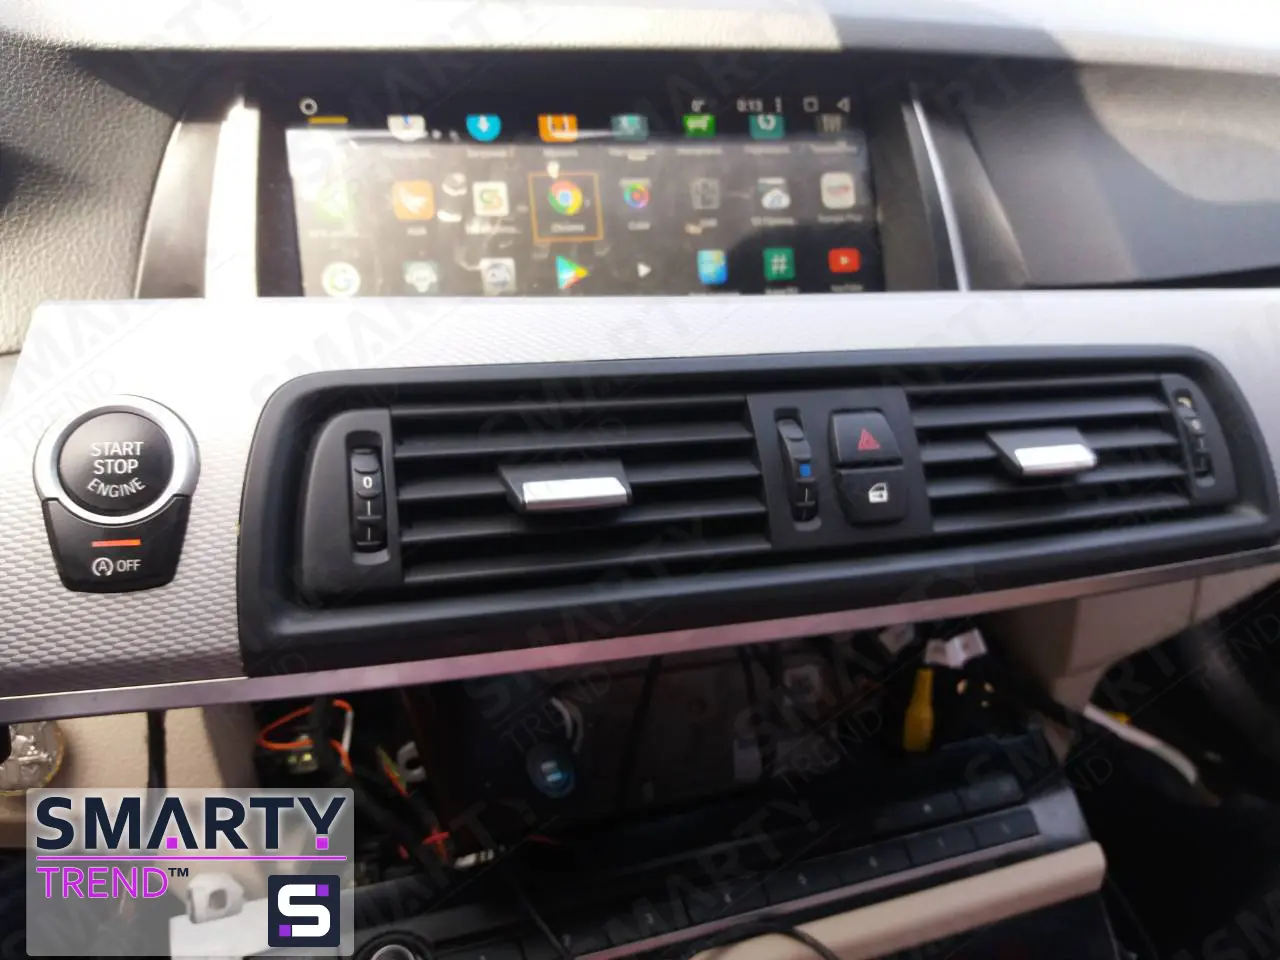 SMARTY Trend head unit for BMW F10